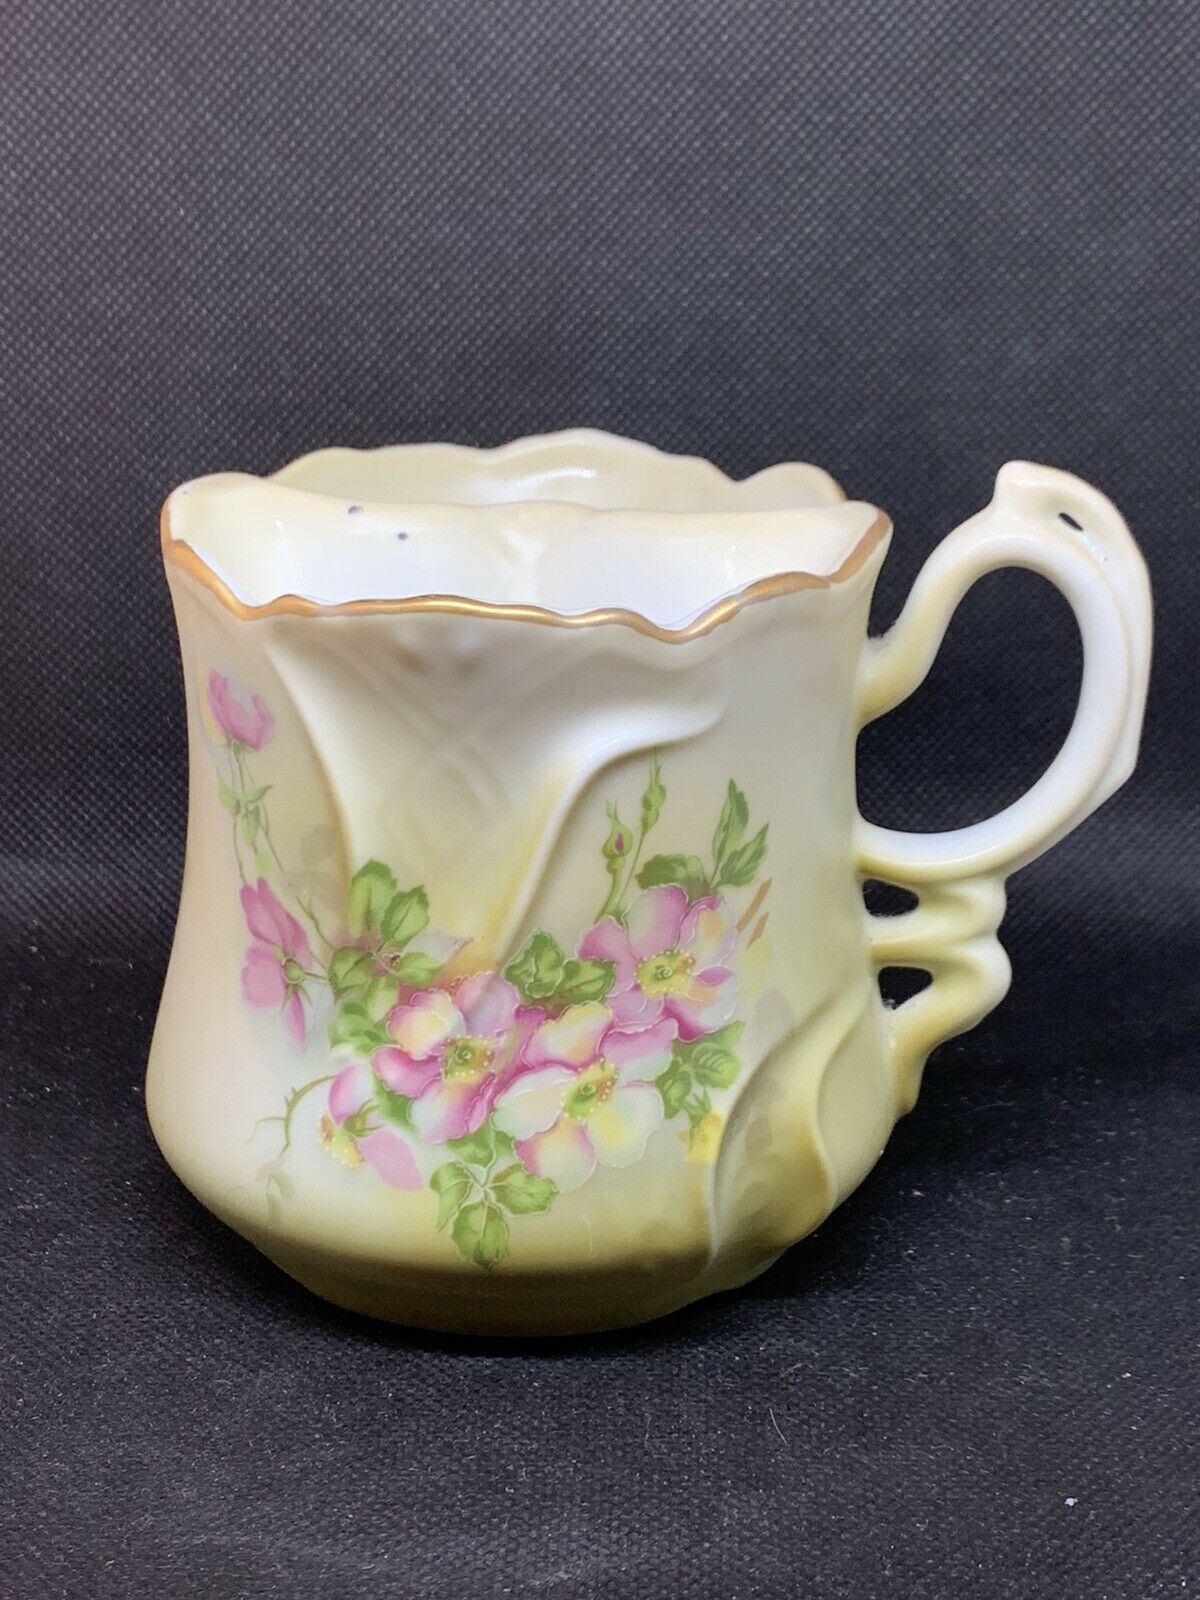 Nippon Hand Painted Porcelain Mustache Cup. Gold Trim. Wildflower